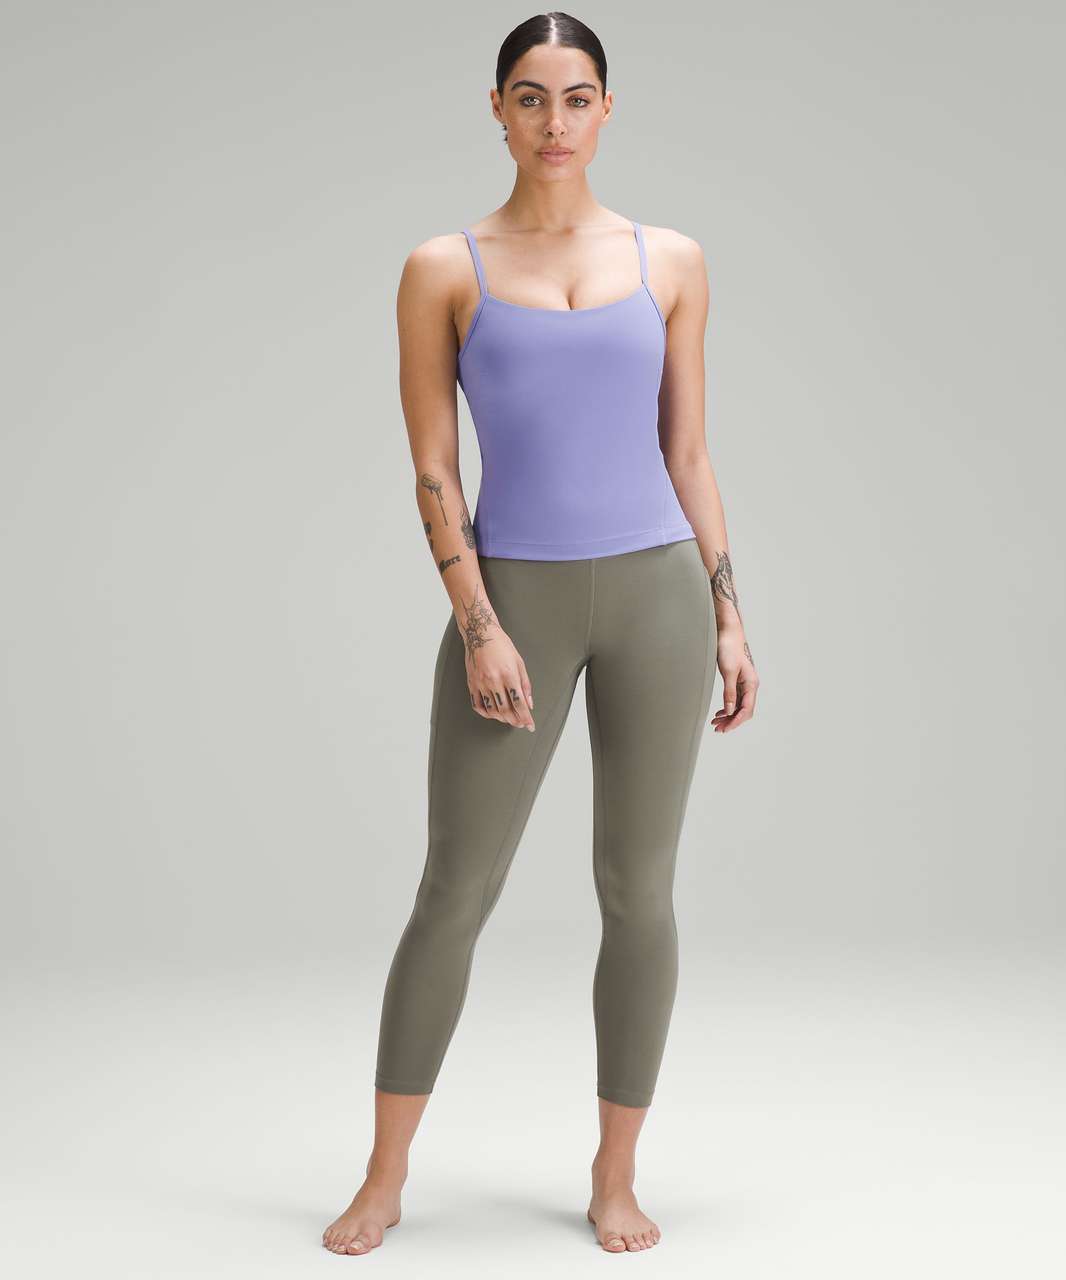 Cropped nulu yoga top with here to there pant. I just wanted to